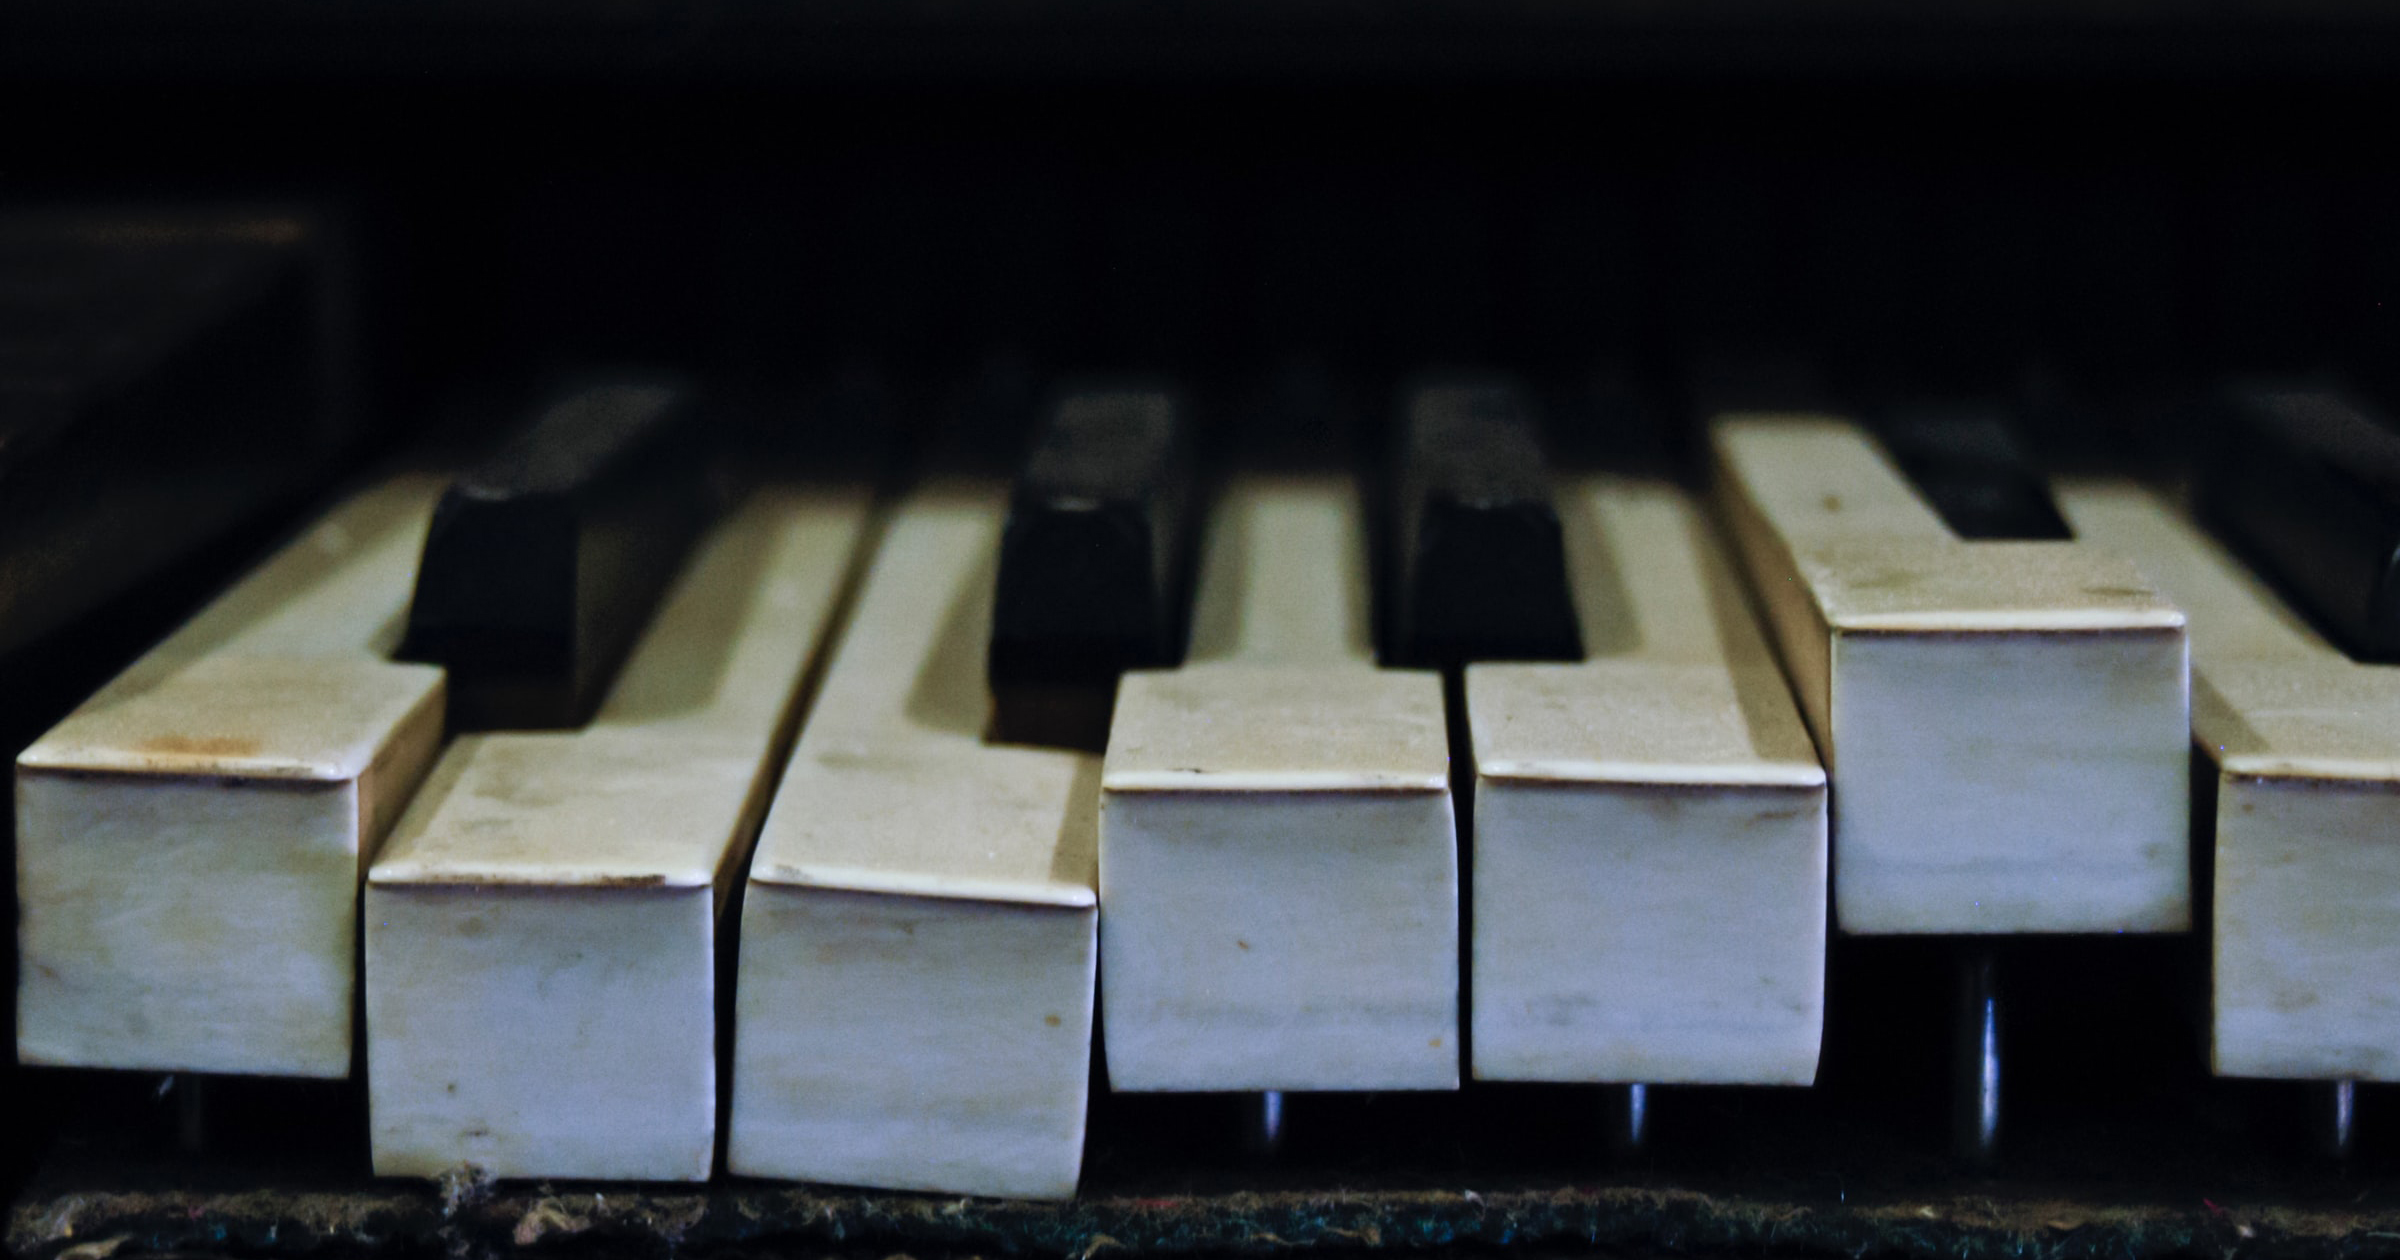 A close up of a piano keyboard with broken/warped keys going in various directions.